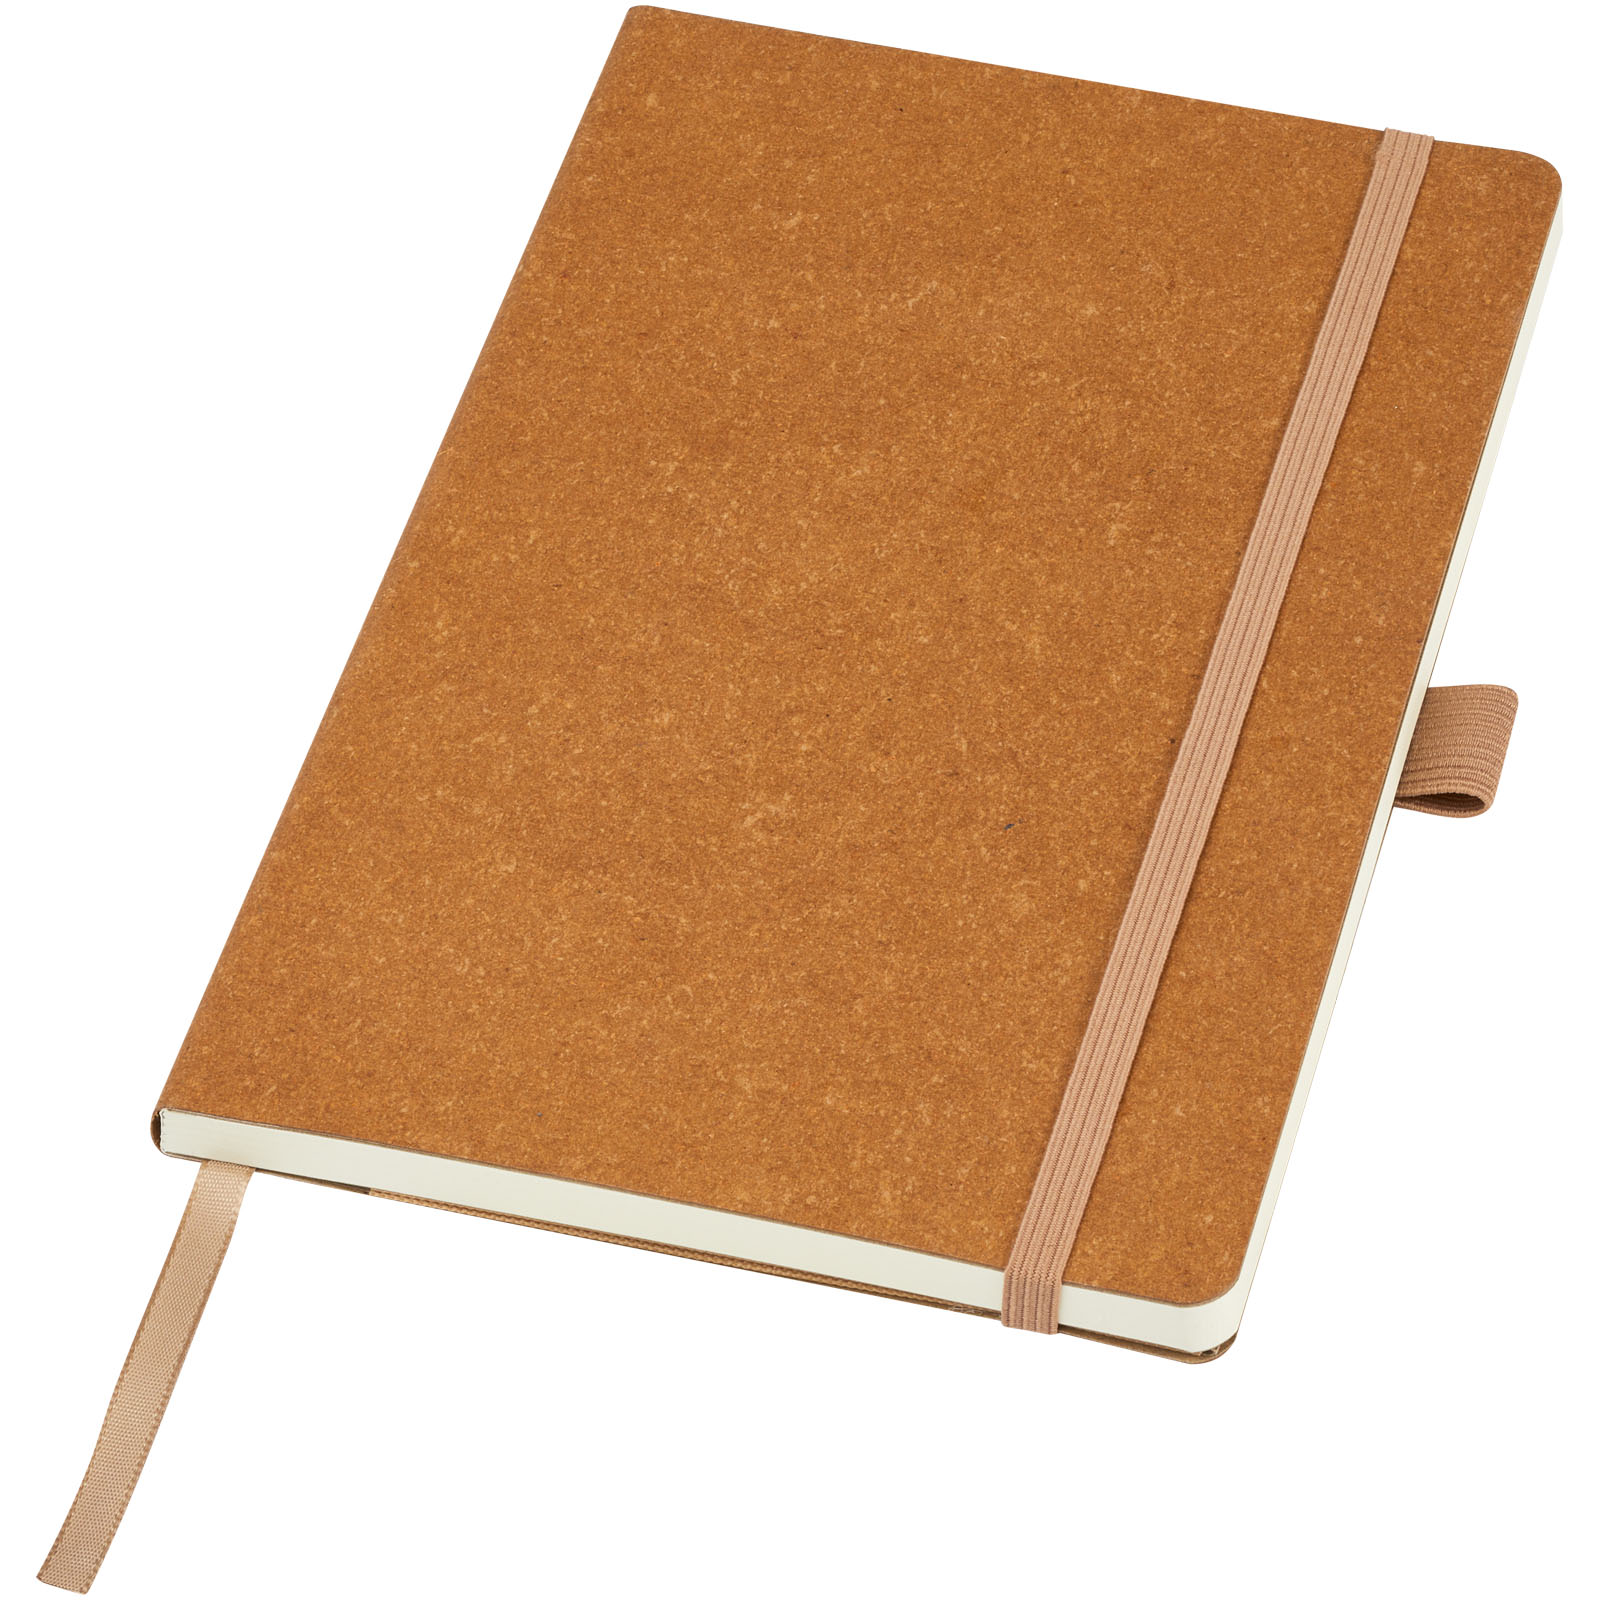 Advertising Soft cover notebooks - Kilau recycled leather notebook 